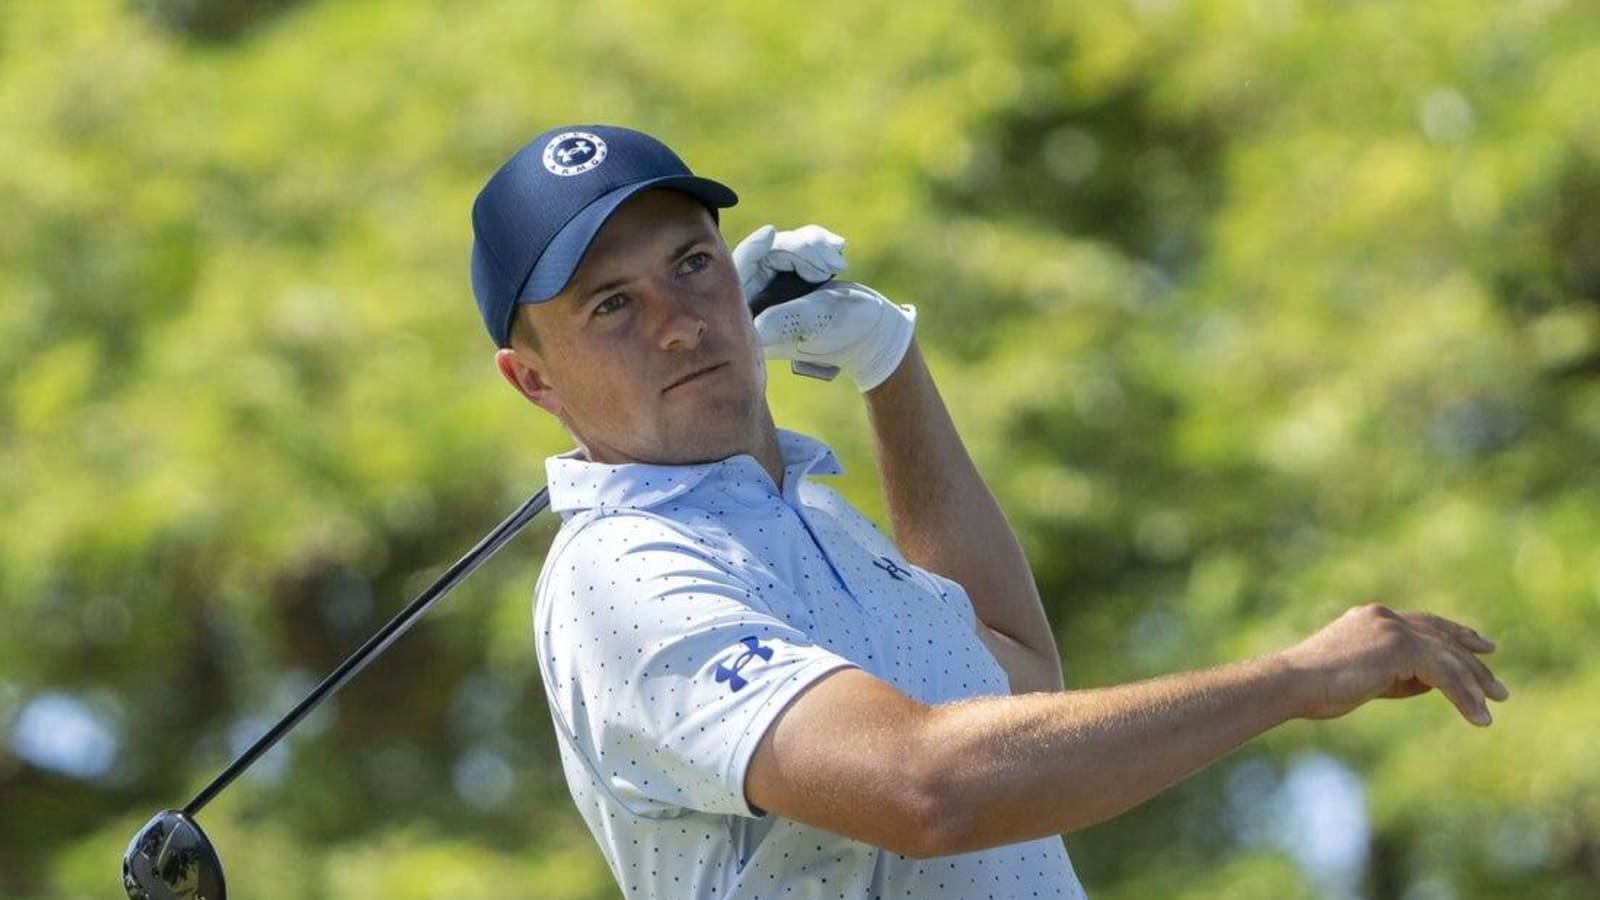 Jordan Spieth goes from share of Sony Open lead to missing cut